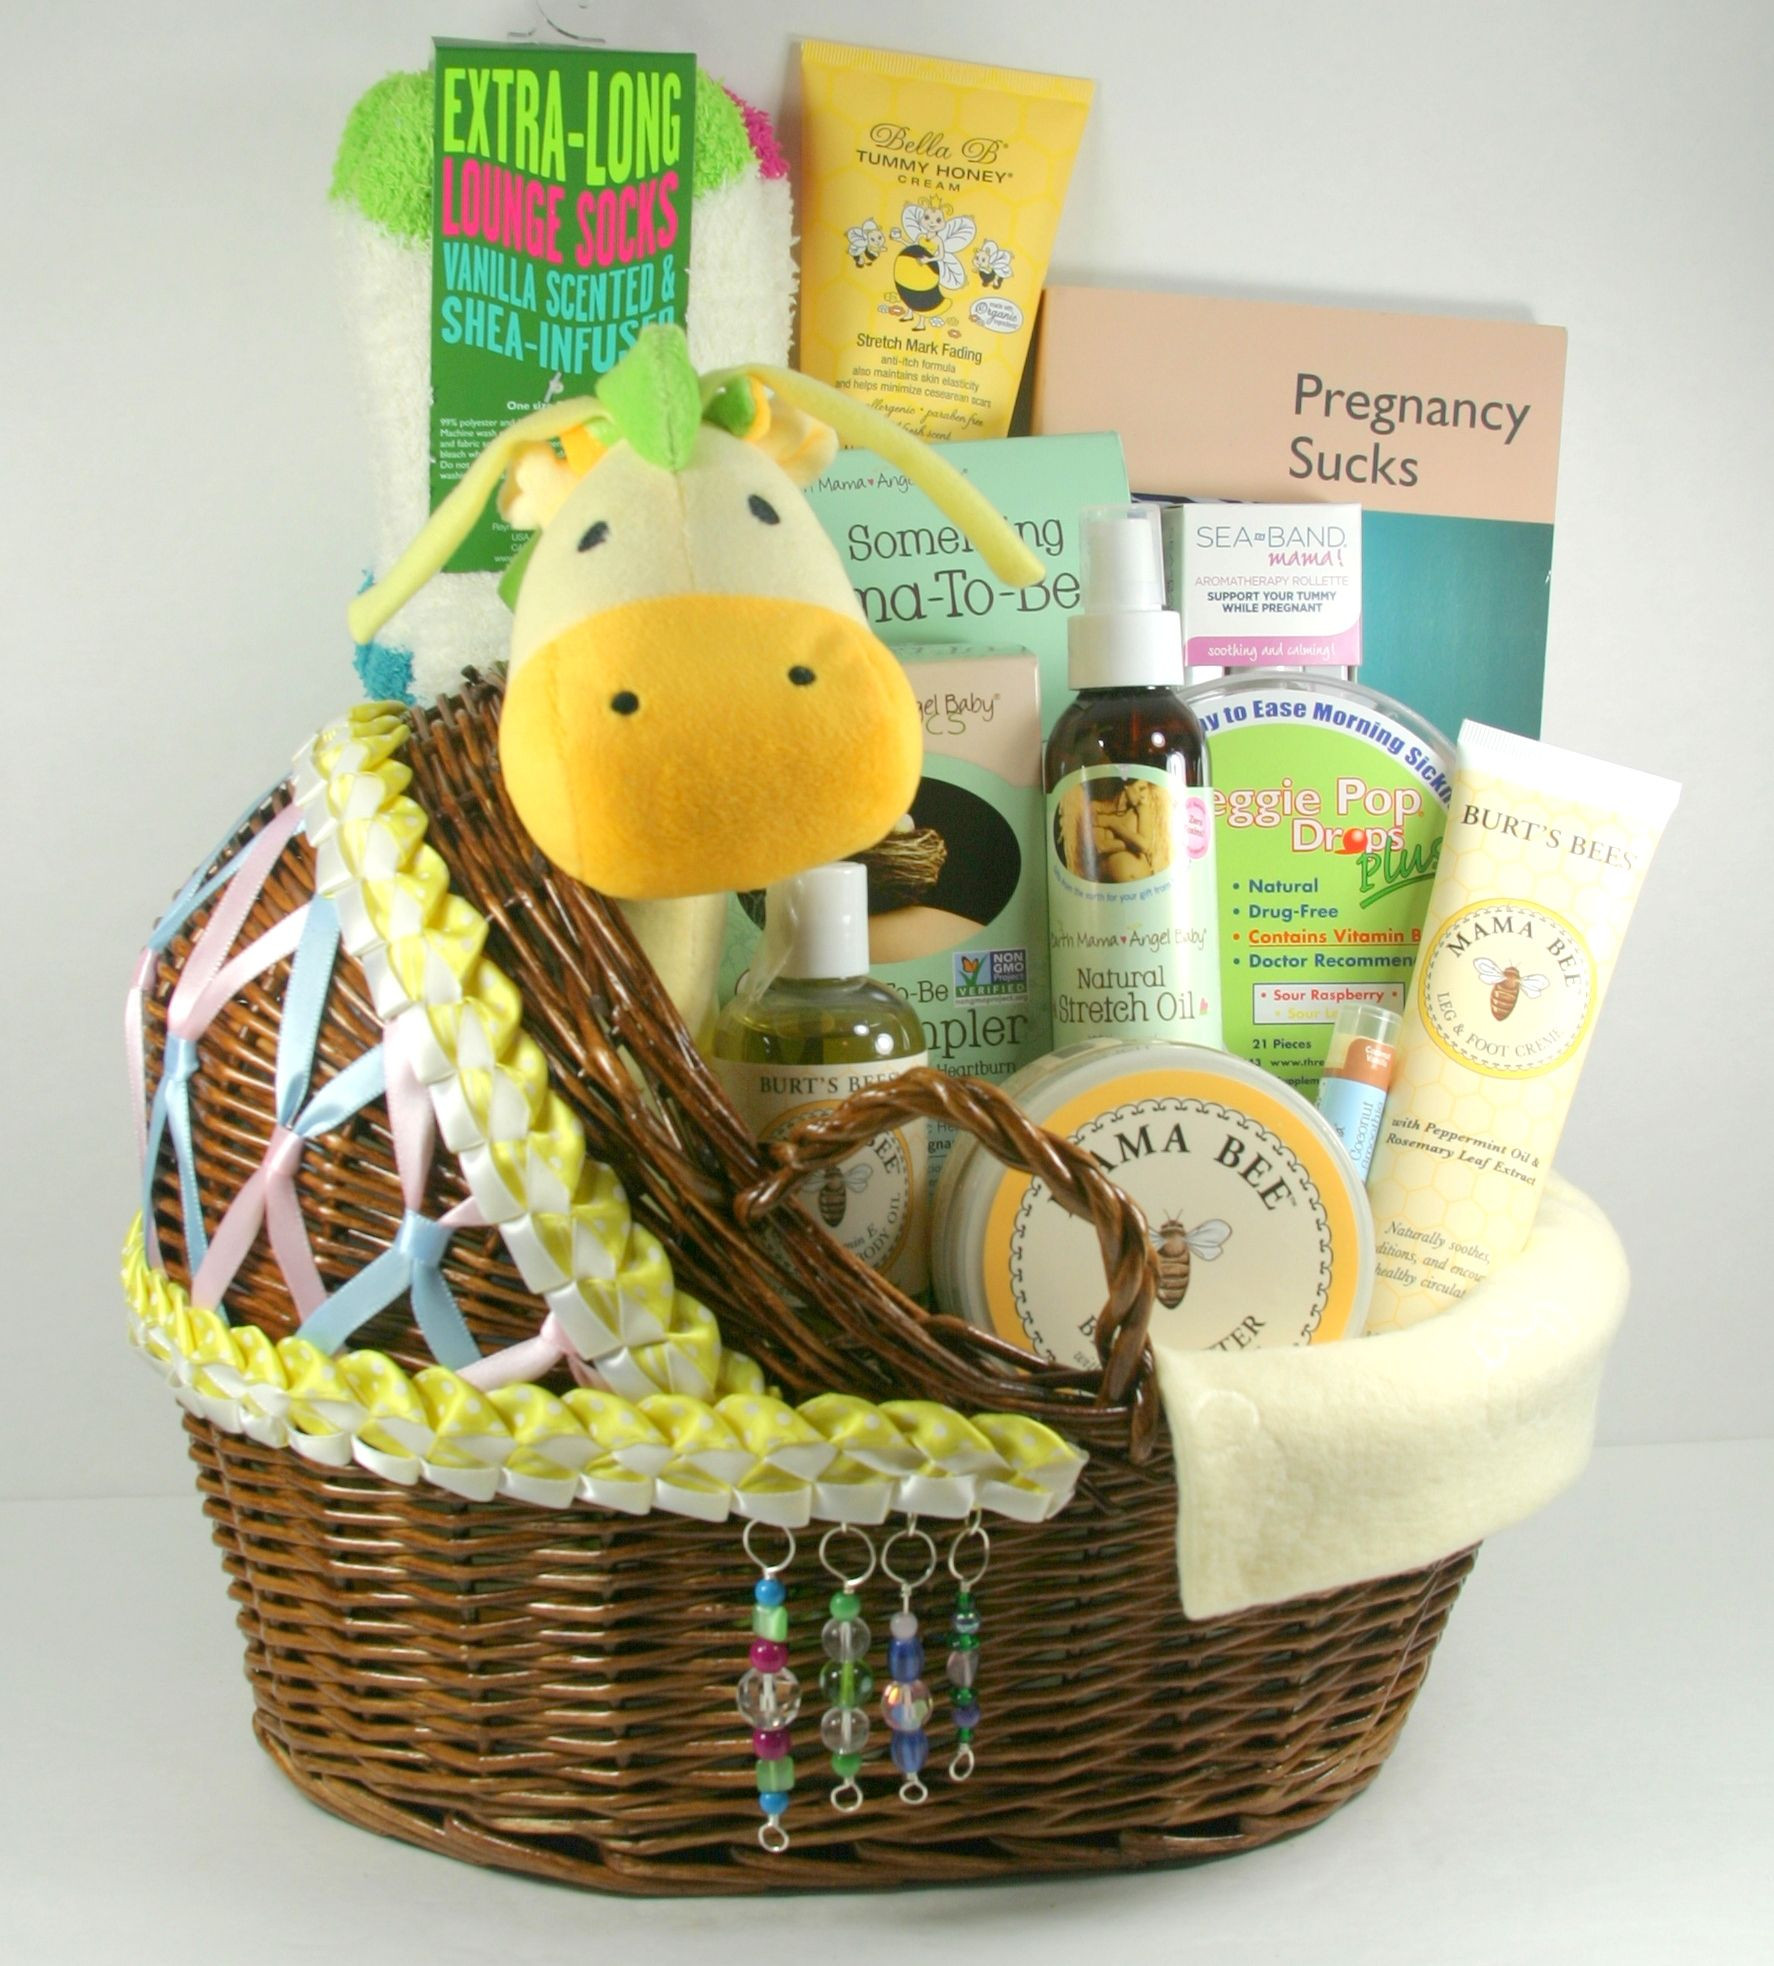 Top 22 Gift Basket Ideas for Expecting Mom – Home, Family, Style and